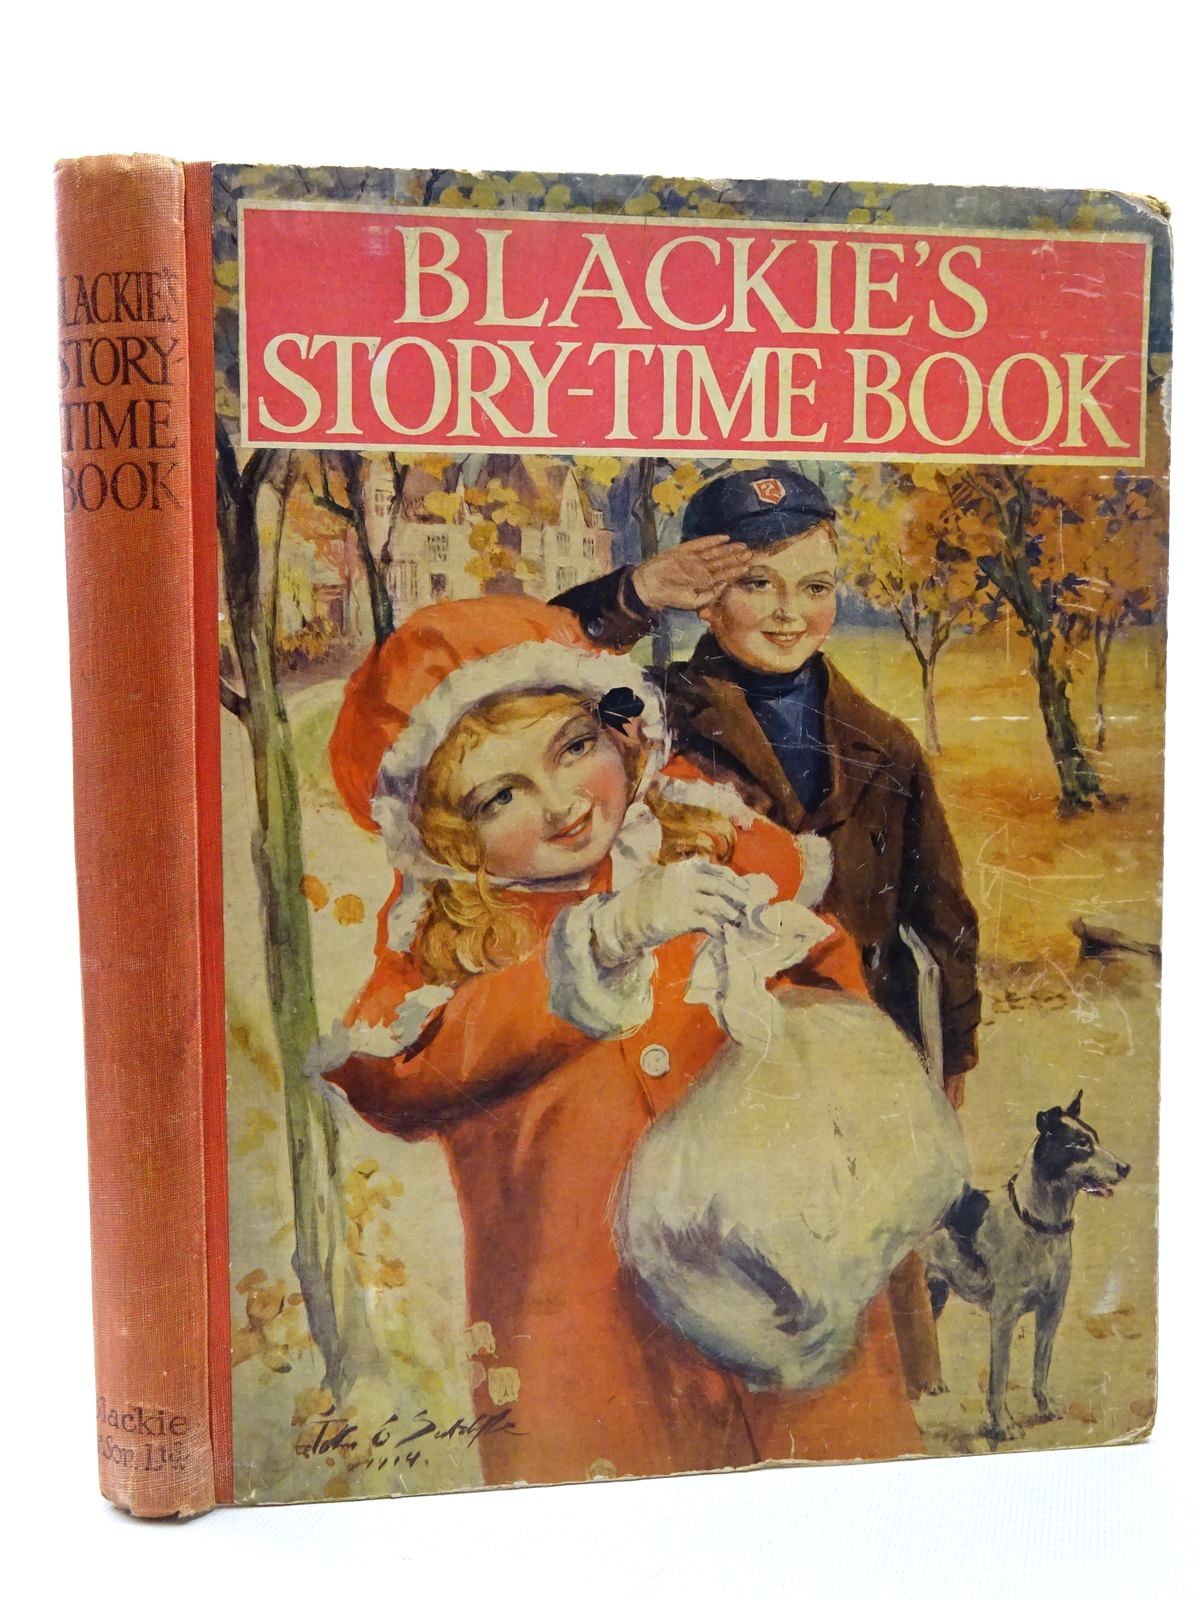 Photo of BLACKIE'S STORY-TIME BOOK written by Tent, Chris
Davidson, Gladys
Wilson, Theodora Wilson
Byron, May
Harrison, Florence
et al,  illustrated by Richardson, Agnes
Maybank, Thomas
Earnshaw, Harold C.
Wain, Louis
Harrison, Florence
Buchanan, N.
Cowham, Hilda
Brock, H.M.
et al.,  published by Blackie & Son Ltd. (STOCK CODE: 2124405)  for sale by Stella & Rose's Books